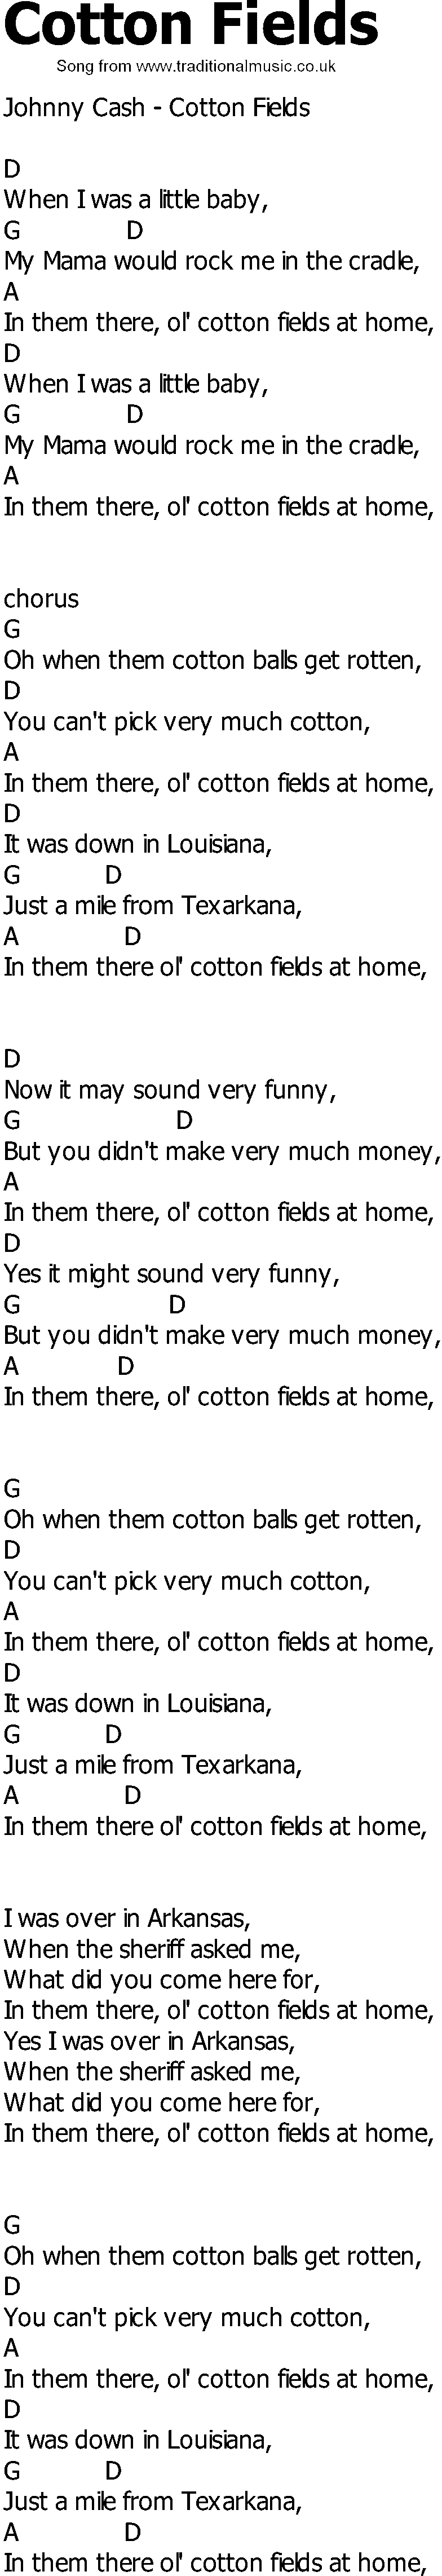 Old Country song lyrics with chords - Cotton Fields